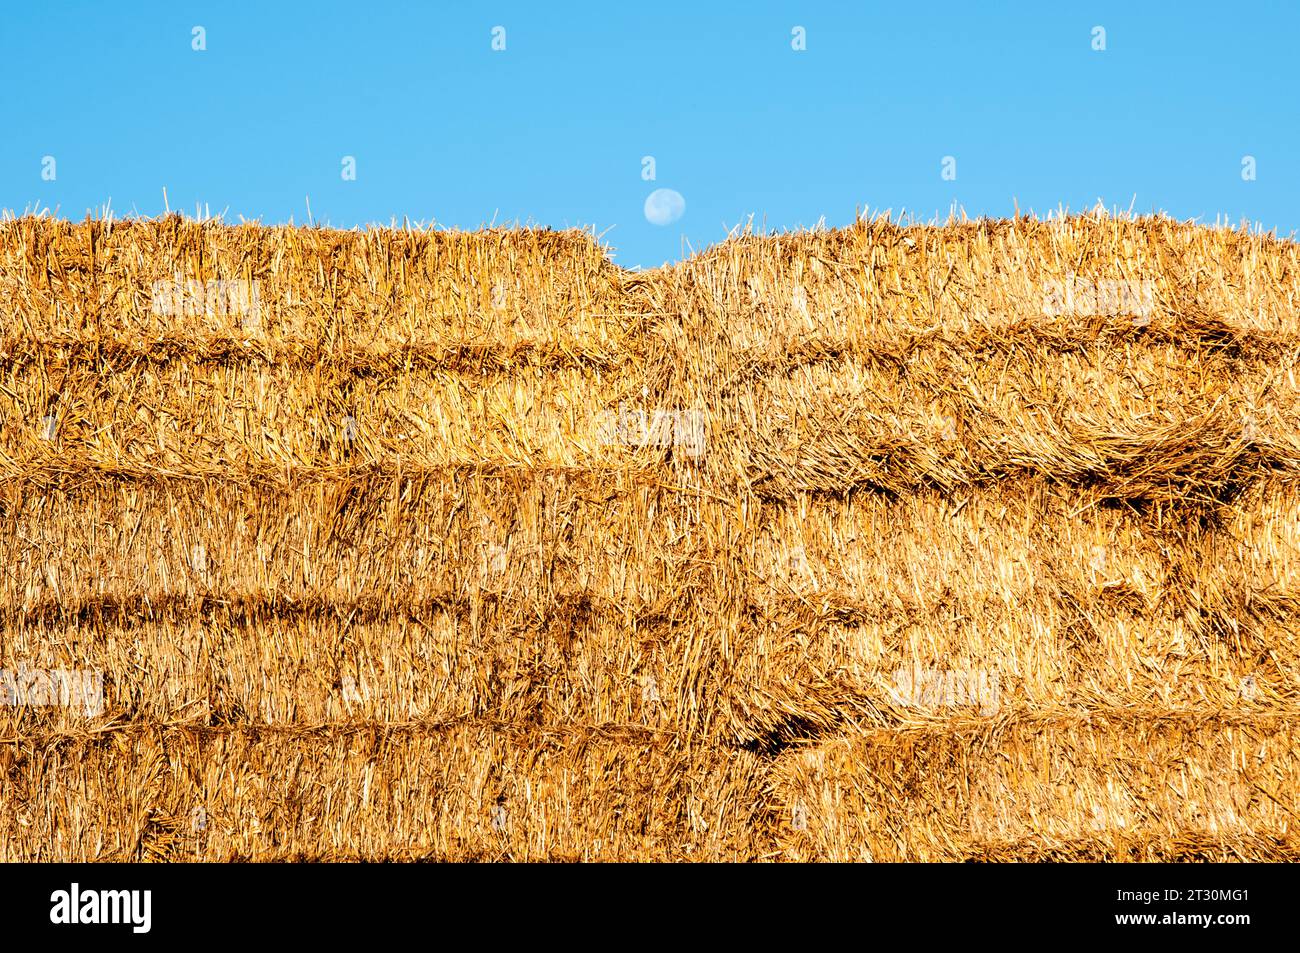 Haystacks. Hay bales in the agricultural field. Hey bales. Harvest time concept. It's about agriculture. Stock Photo